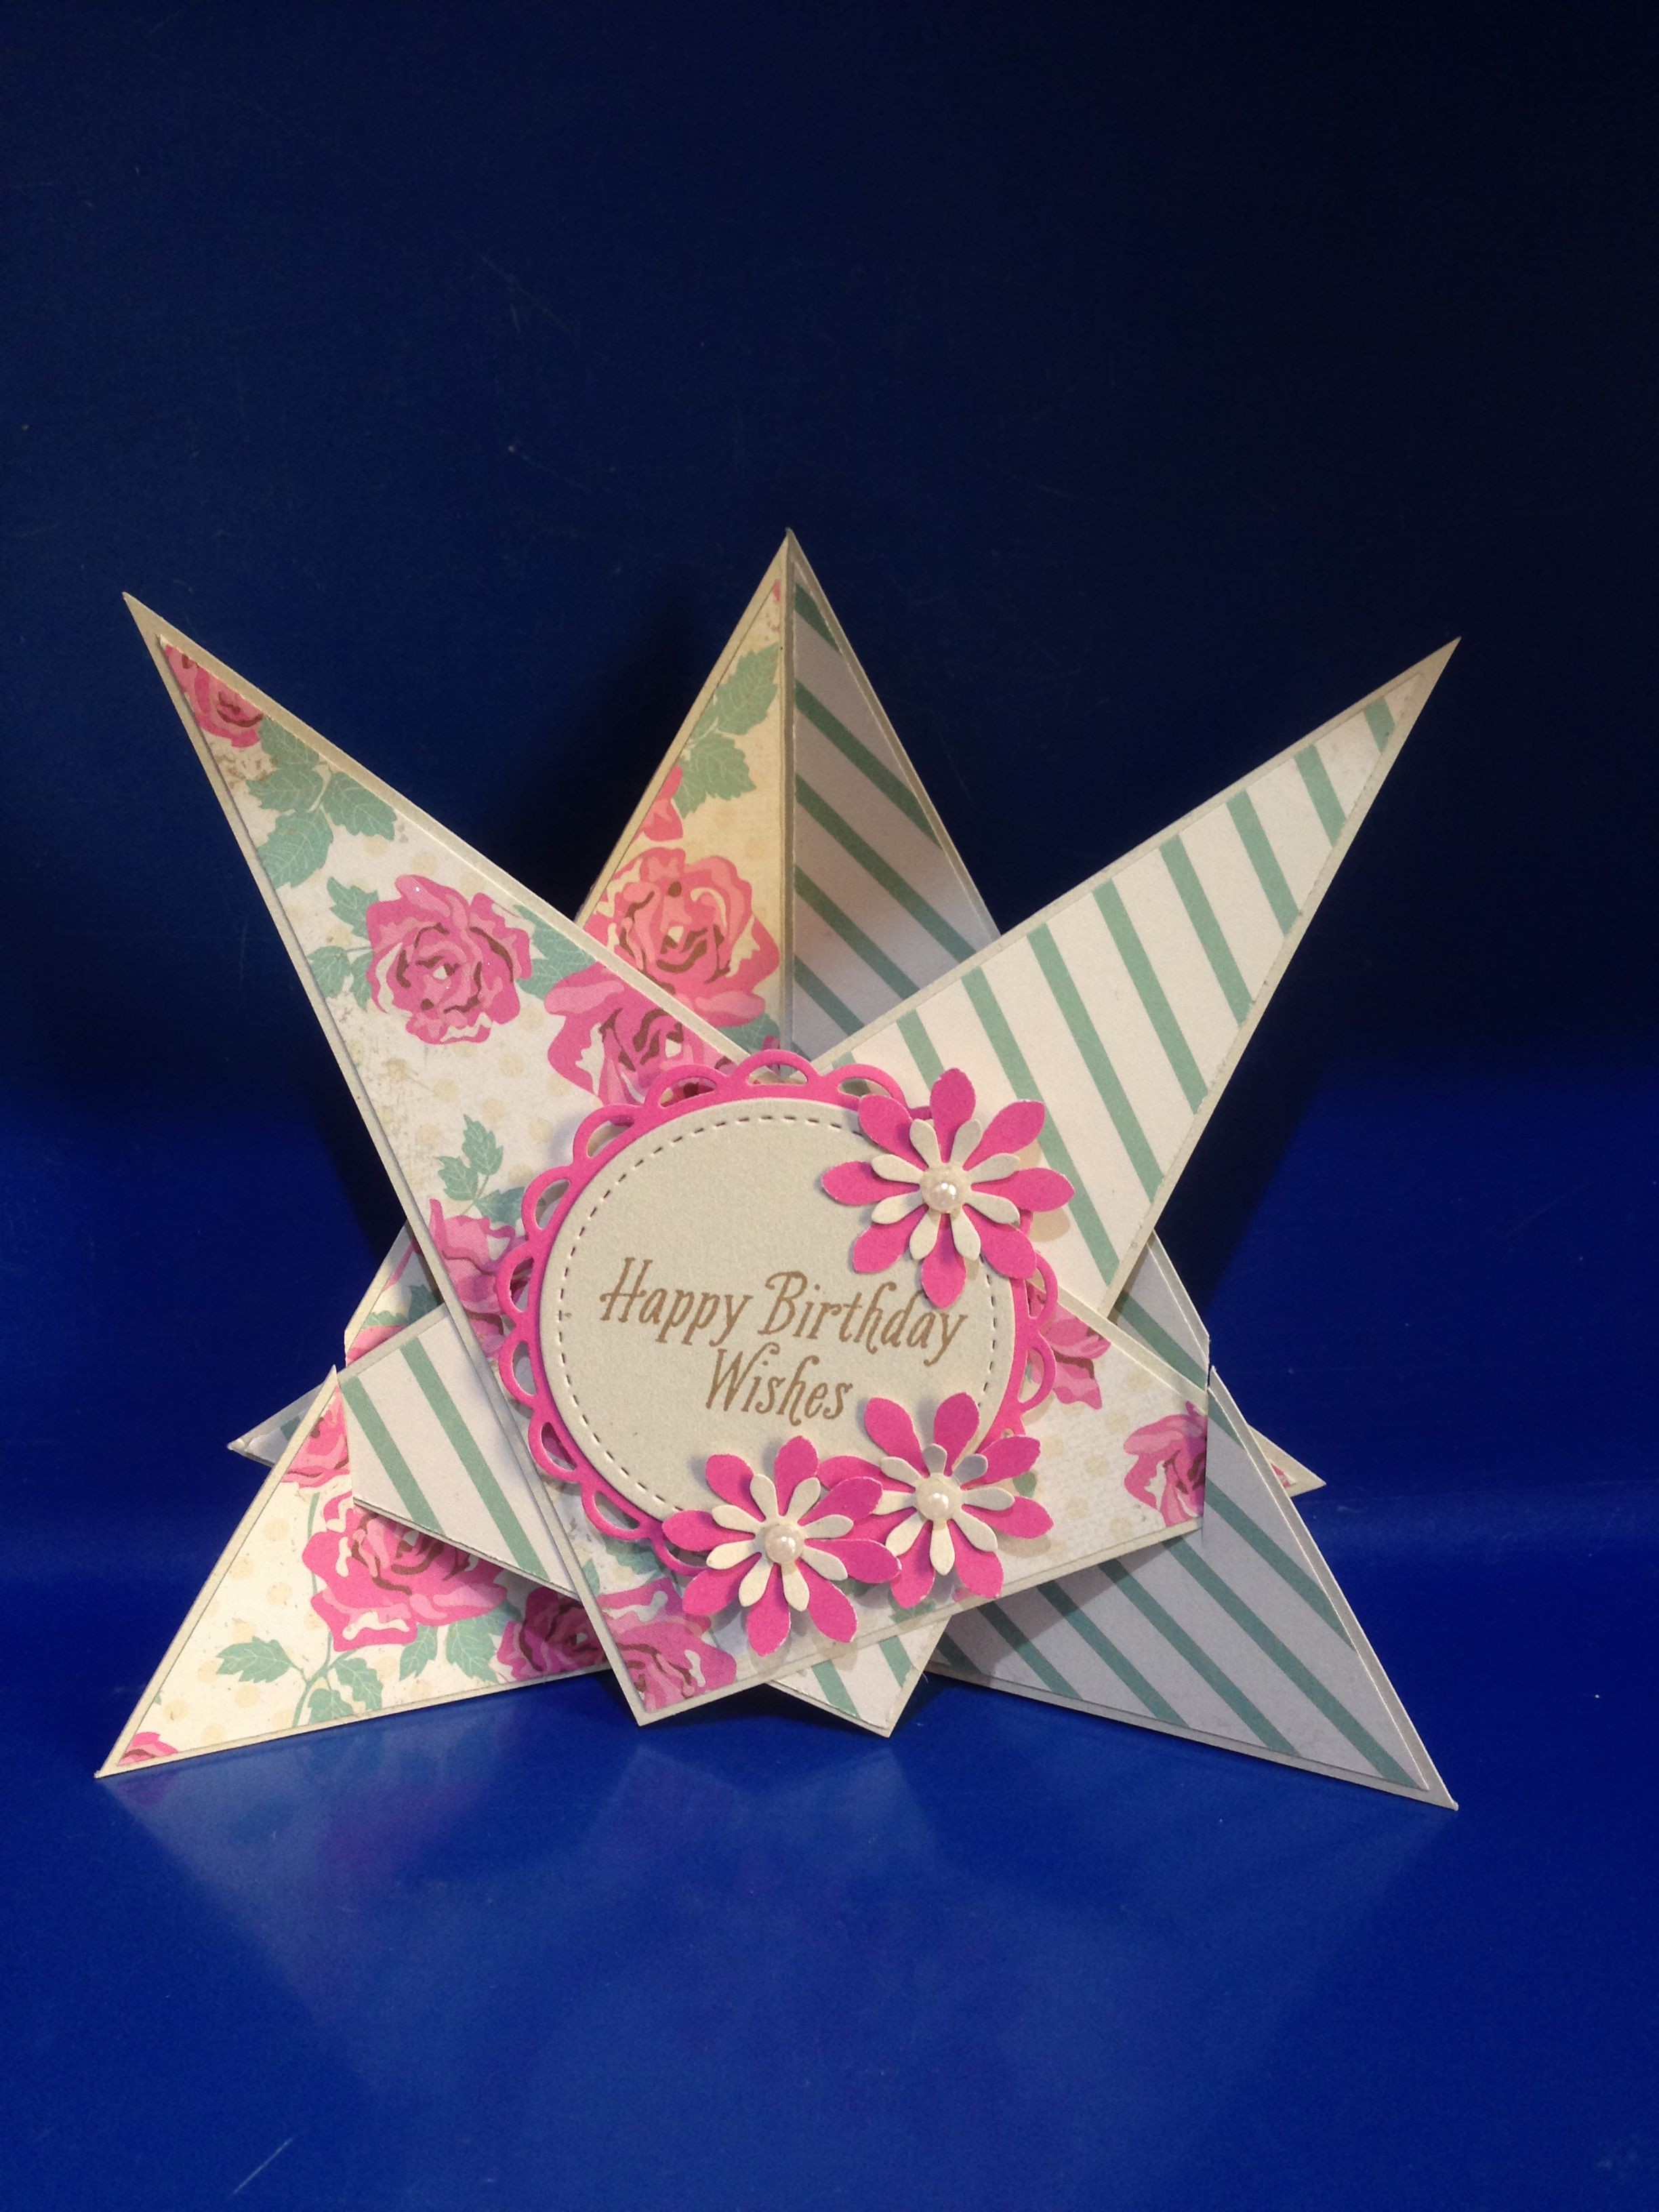 Papercraft Man Star Effect Card Apparently First Person to Make One Of these Type